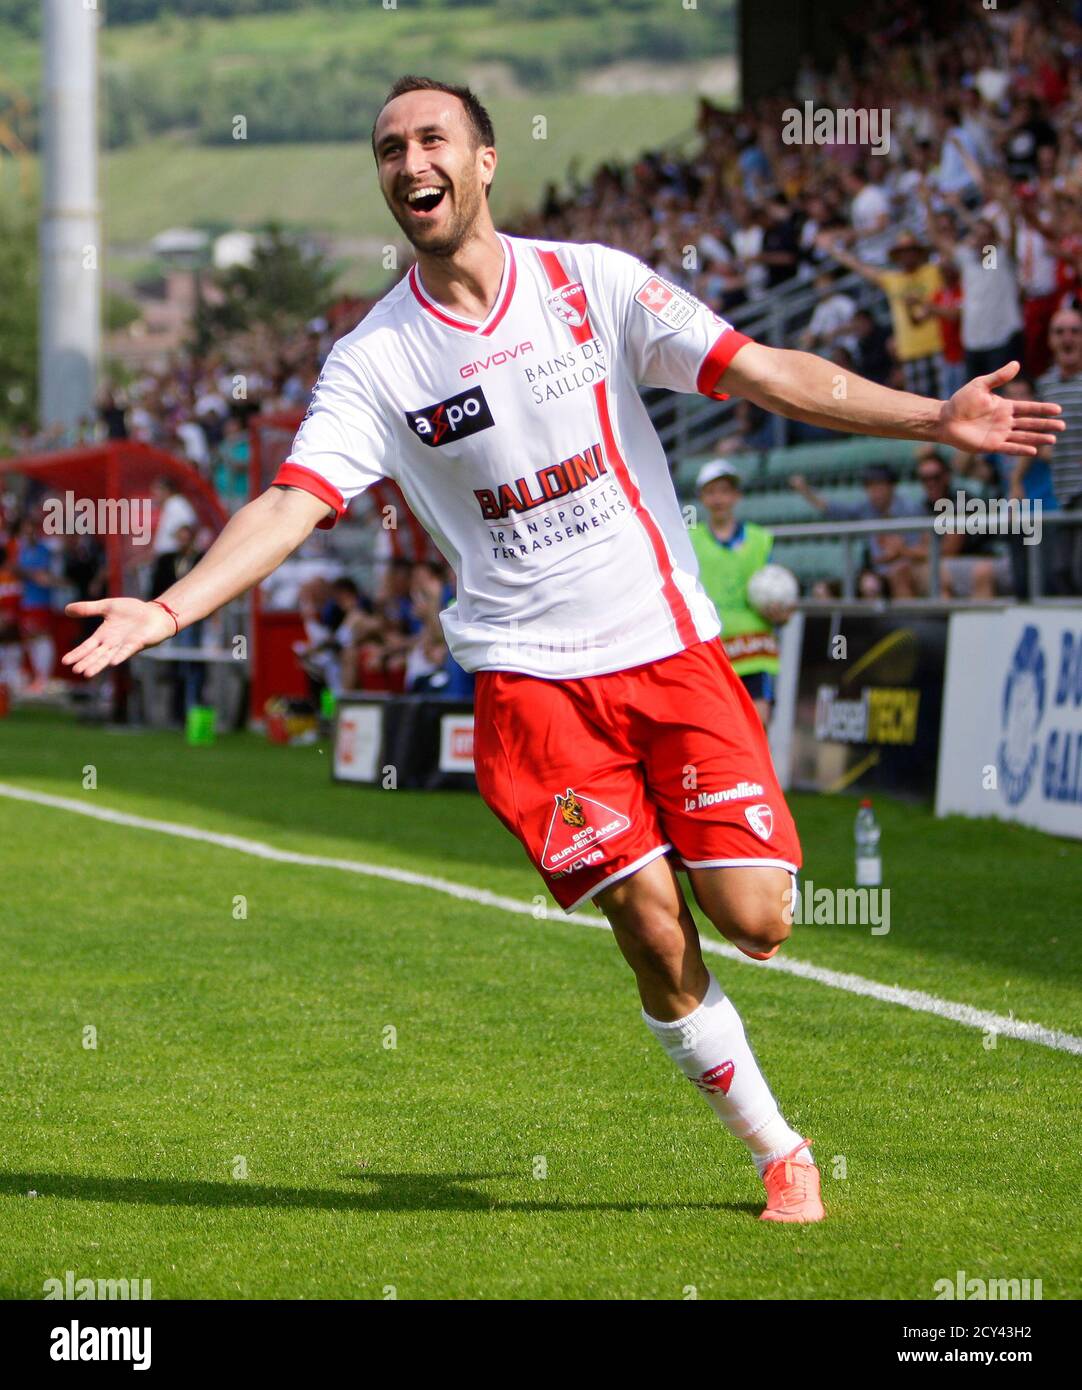 FC Sion's Dragan Mrdja celebrates his goal during his Swiss Super League  promotion and relegation soccer match against FC Aarau in Sion, May 26,  2012. REUTERS/Valentin Flauraud (SWITZERLAND - Tags: SPORT SOCCER